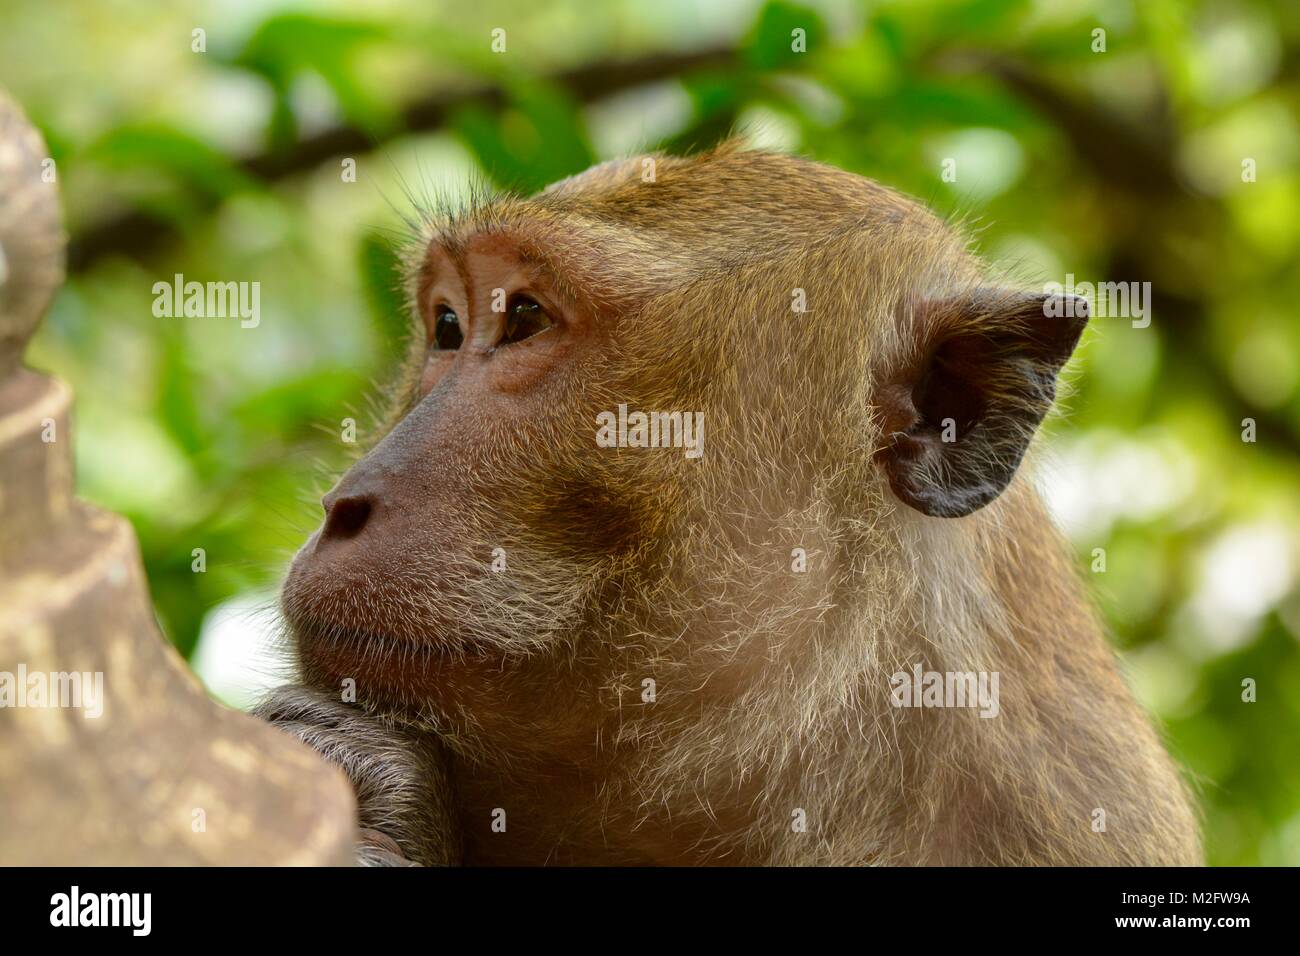 long tailed macaque face Stock Photo